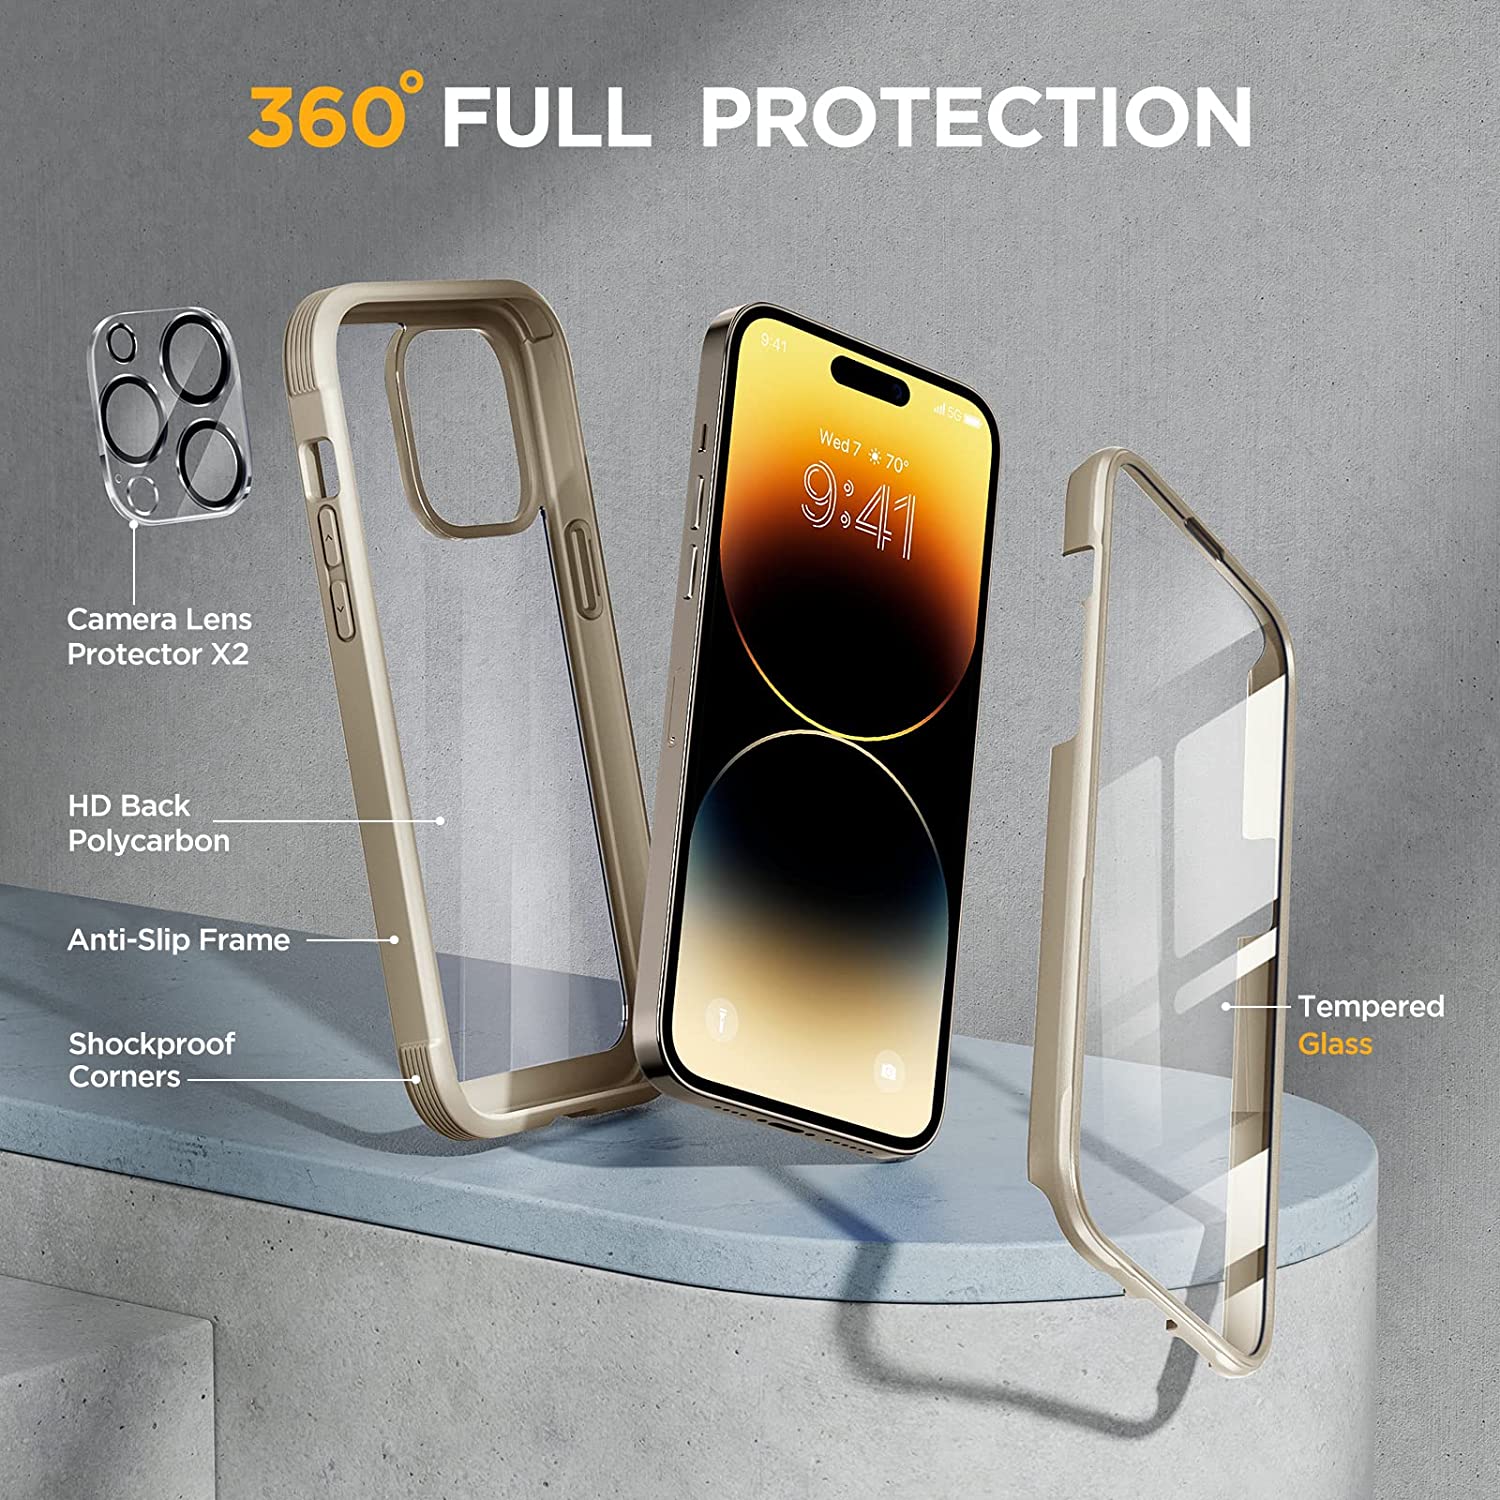 iphone 15 pro max tempered glass for iphone 14 pro max cristal protector  iphone 14 plus 14 pro protection case iphone14 pro max shockproof cover  iphone 14pro screen protector apple iphone 15 pelicula accessories